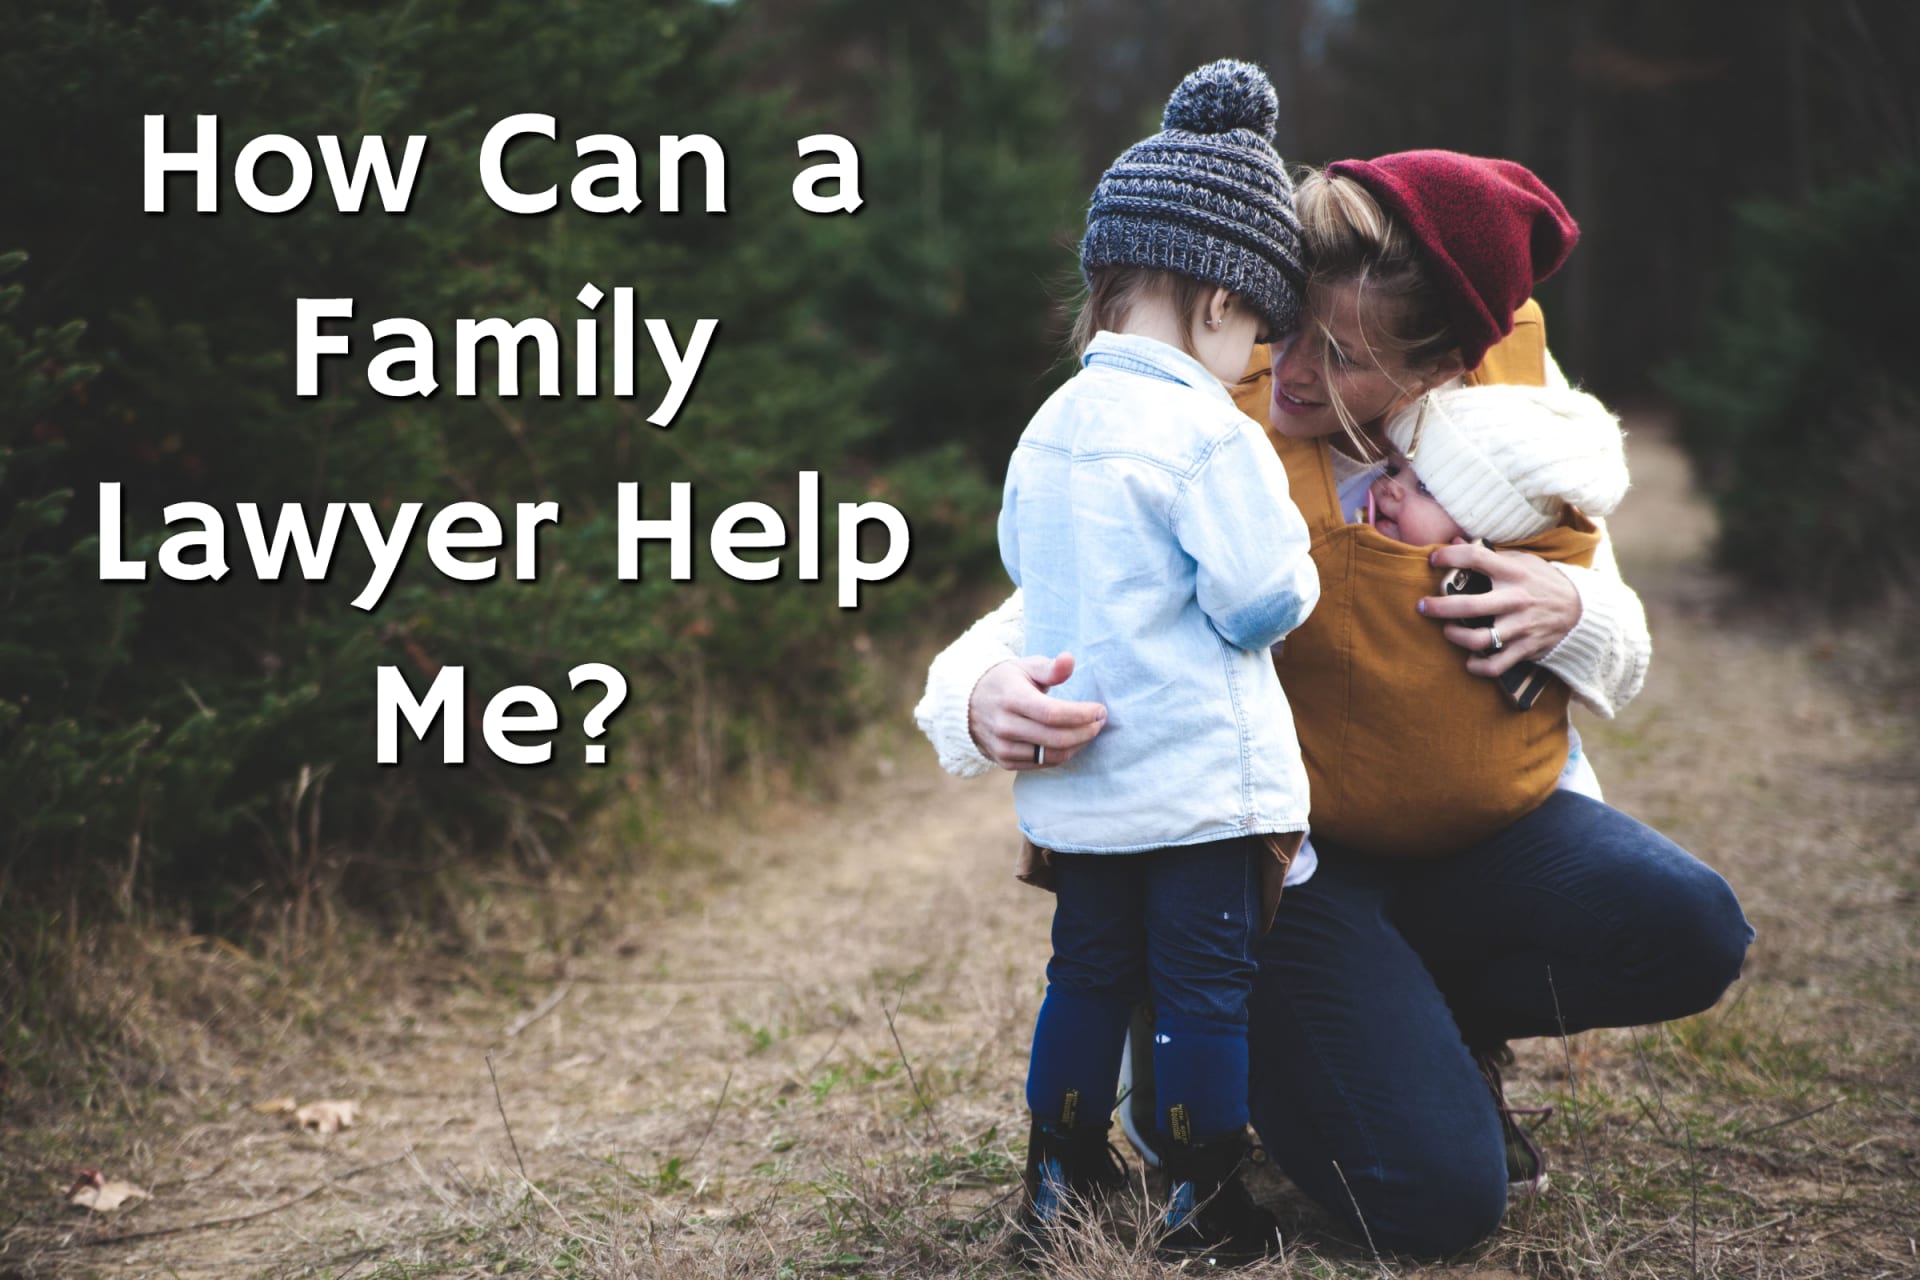 How Can a Family Lawyer Help Me?